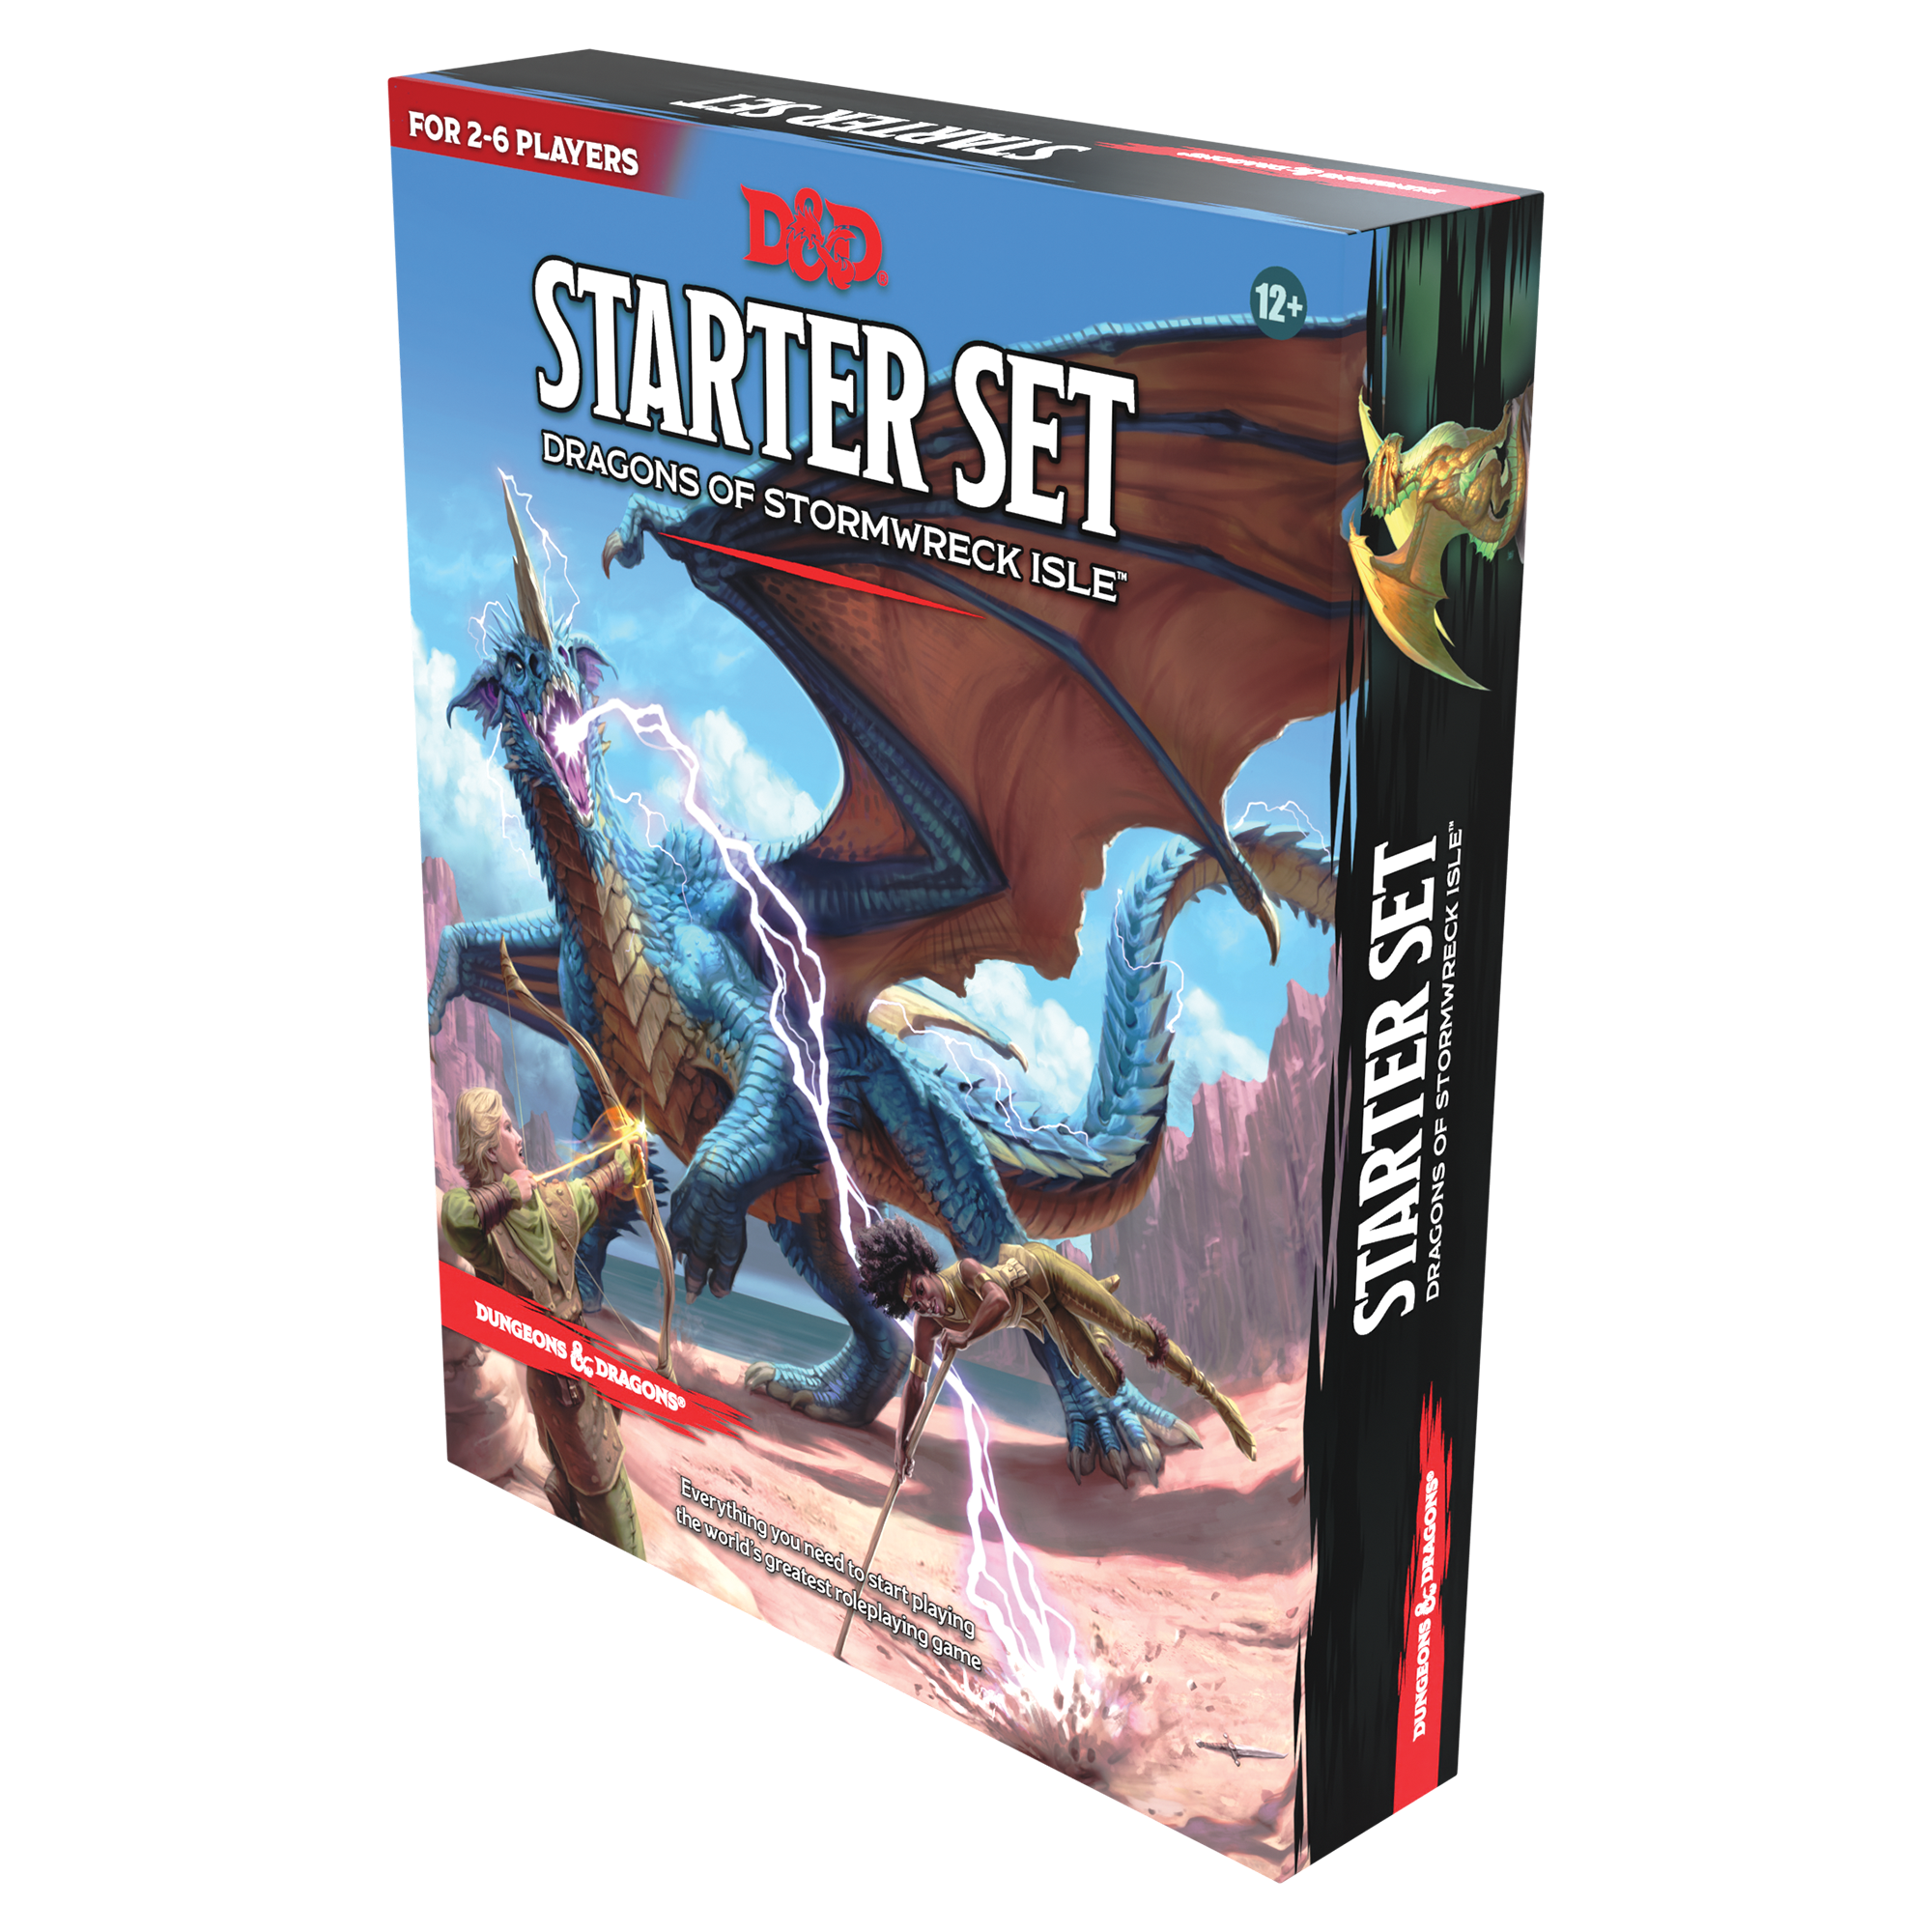 Dungeons & Dragons 5E - STARTER SET DRAGONS OF STORMWRECK ISLE | Impulse Games and Hobbies